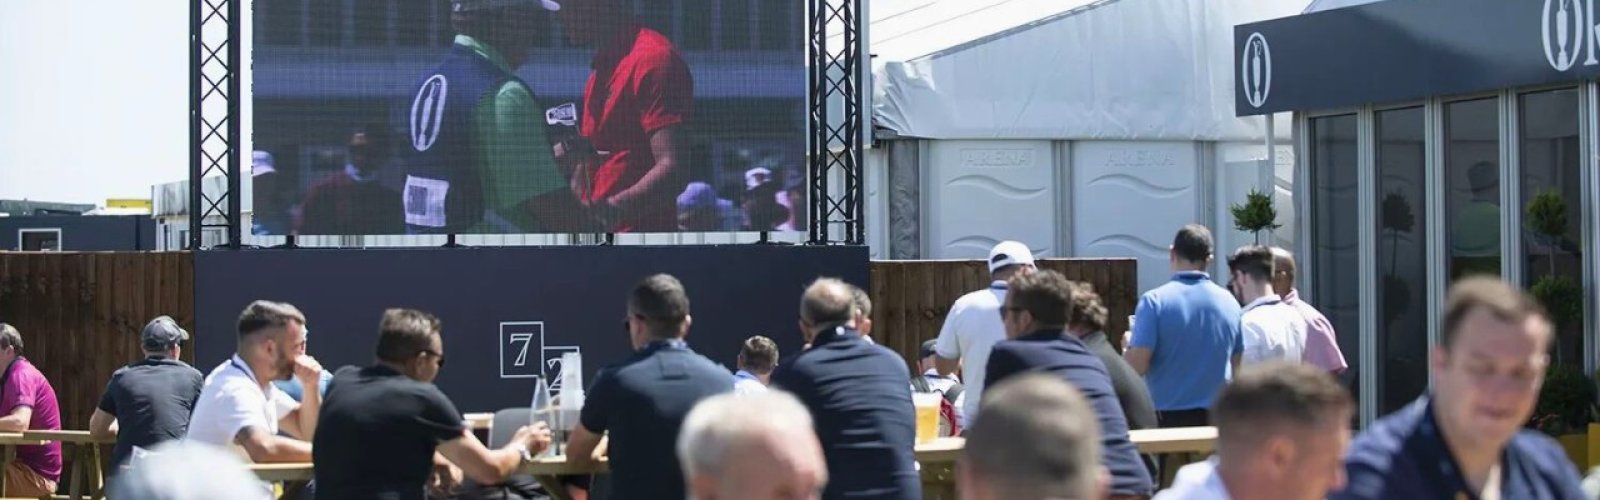 The 152nd Open Golf ticket packages for Scorers hospitality